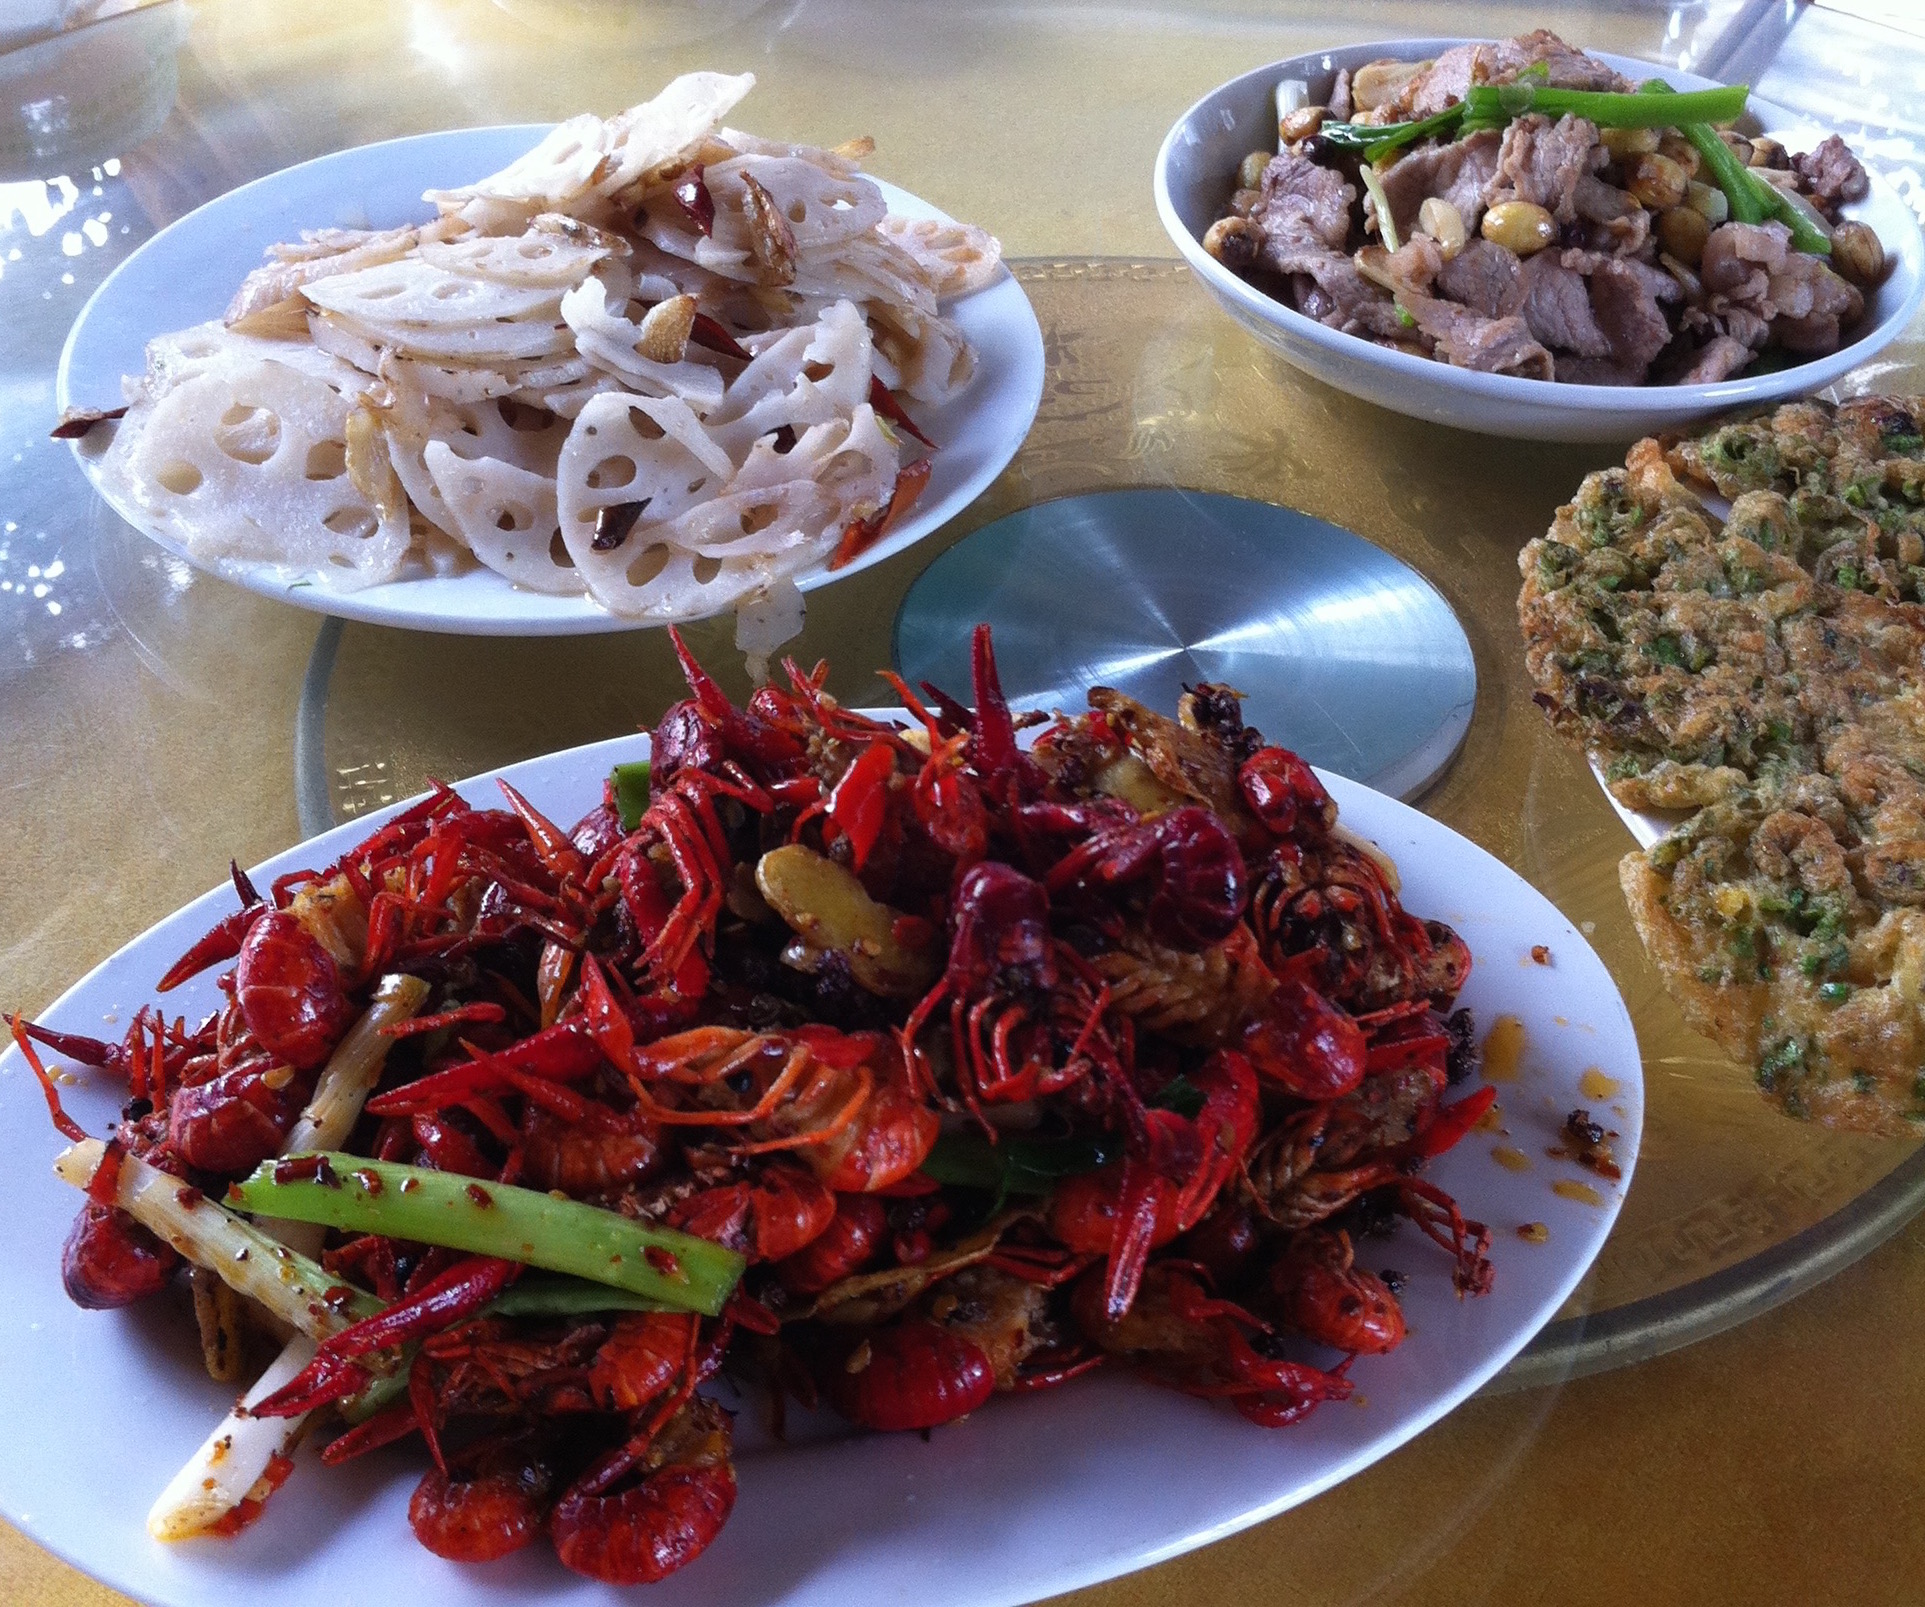 Lunch pulled from the lake: crawfish, lotus root, pork with lotus seeds, and eggs with lotus leaf.